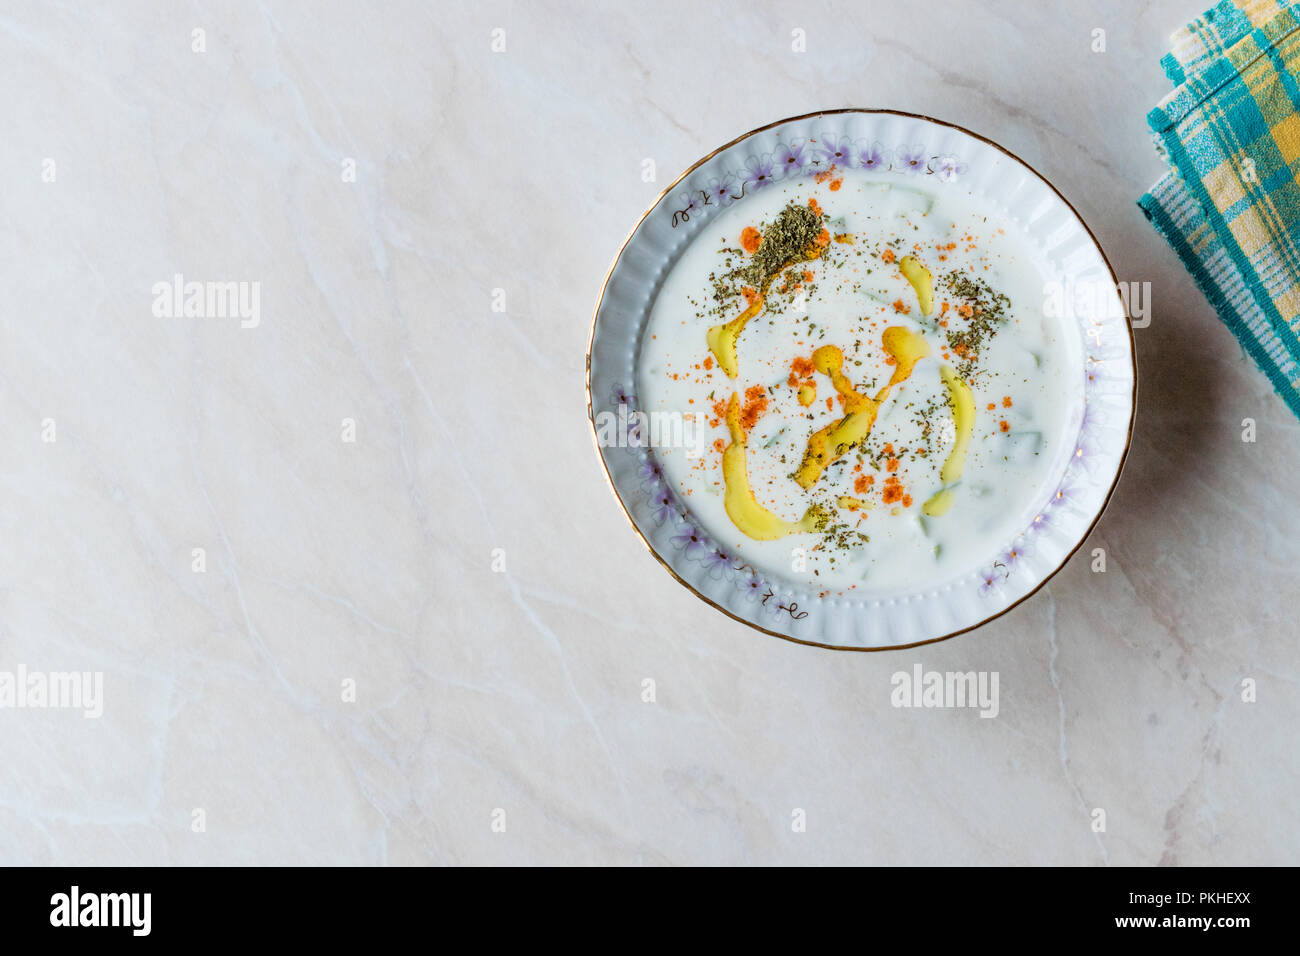 Cacik / Tzatziki Sauce with Yogurt, Cucumber Slices, Olive Oil, Thyme and Red Pepper Powder in Ceramic Bowl. Traditional Organic Food. Stock Photo